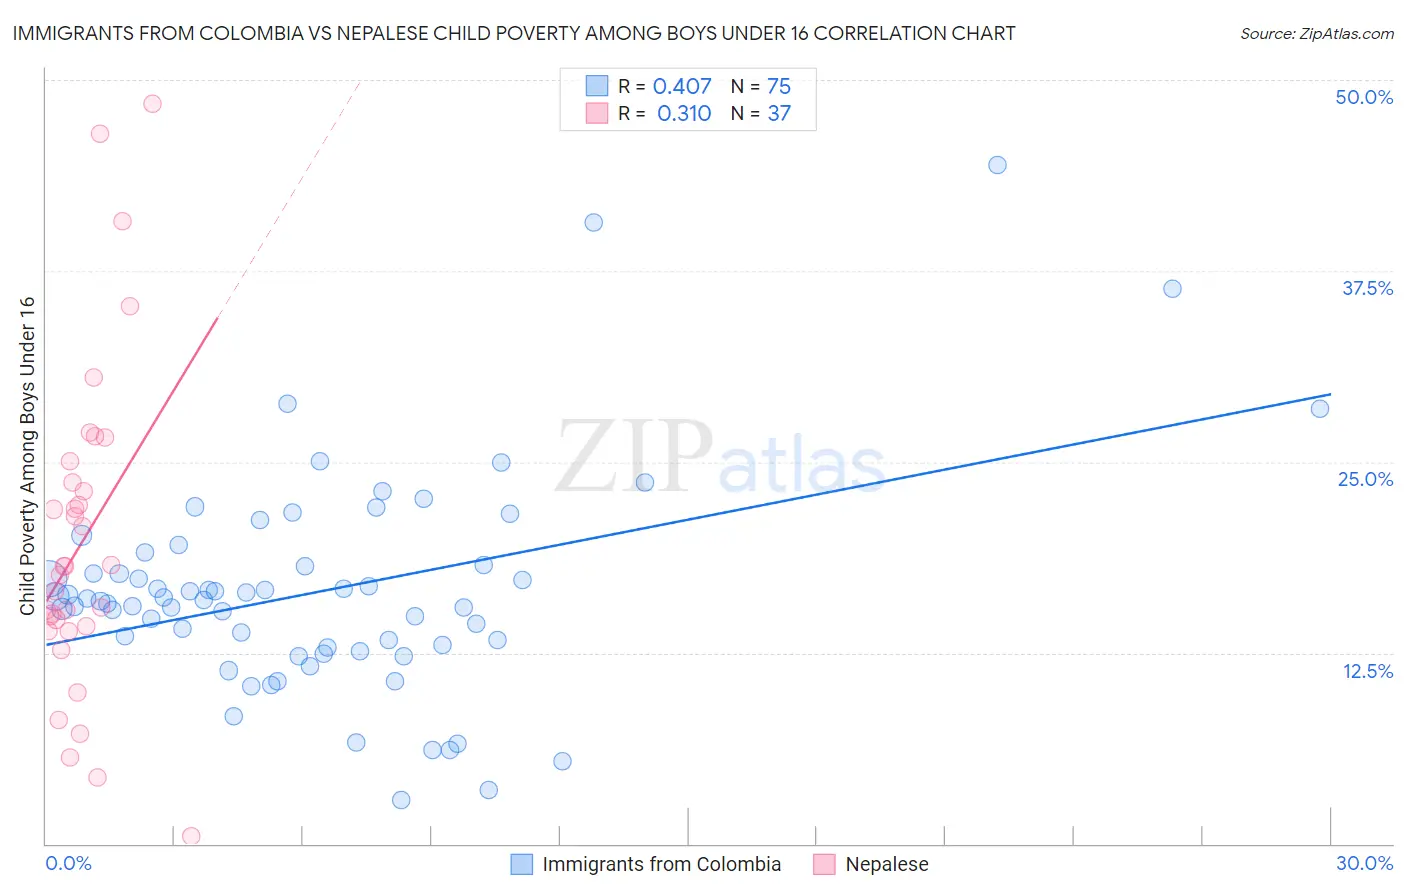 Immigrants from Colombia vs Nepalese Child Poverty Among Boys Under 16